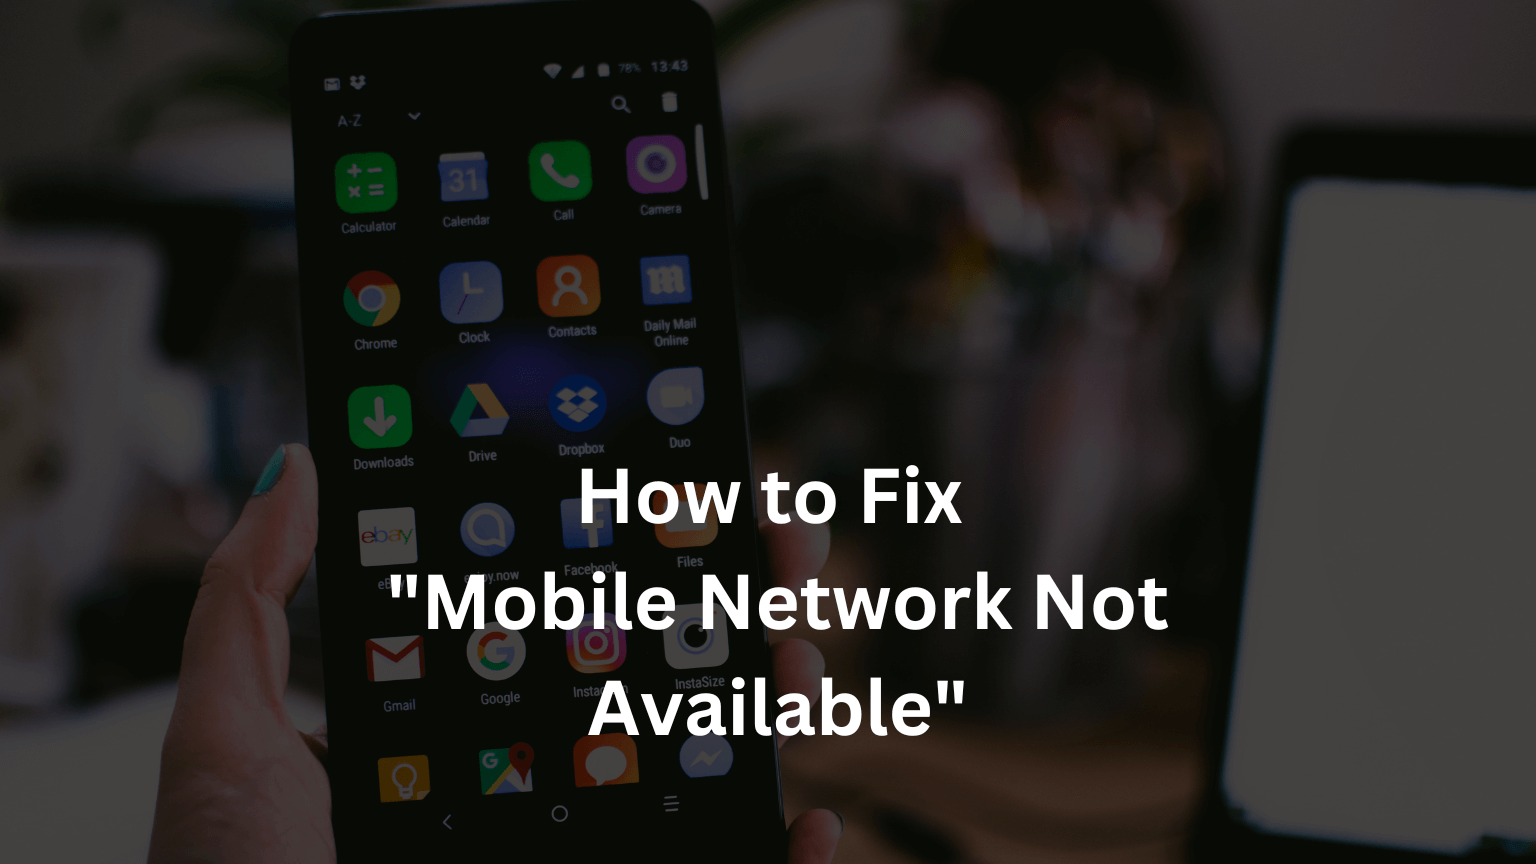 How to Fix “Mobile Network Not Available”